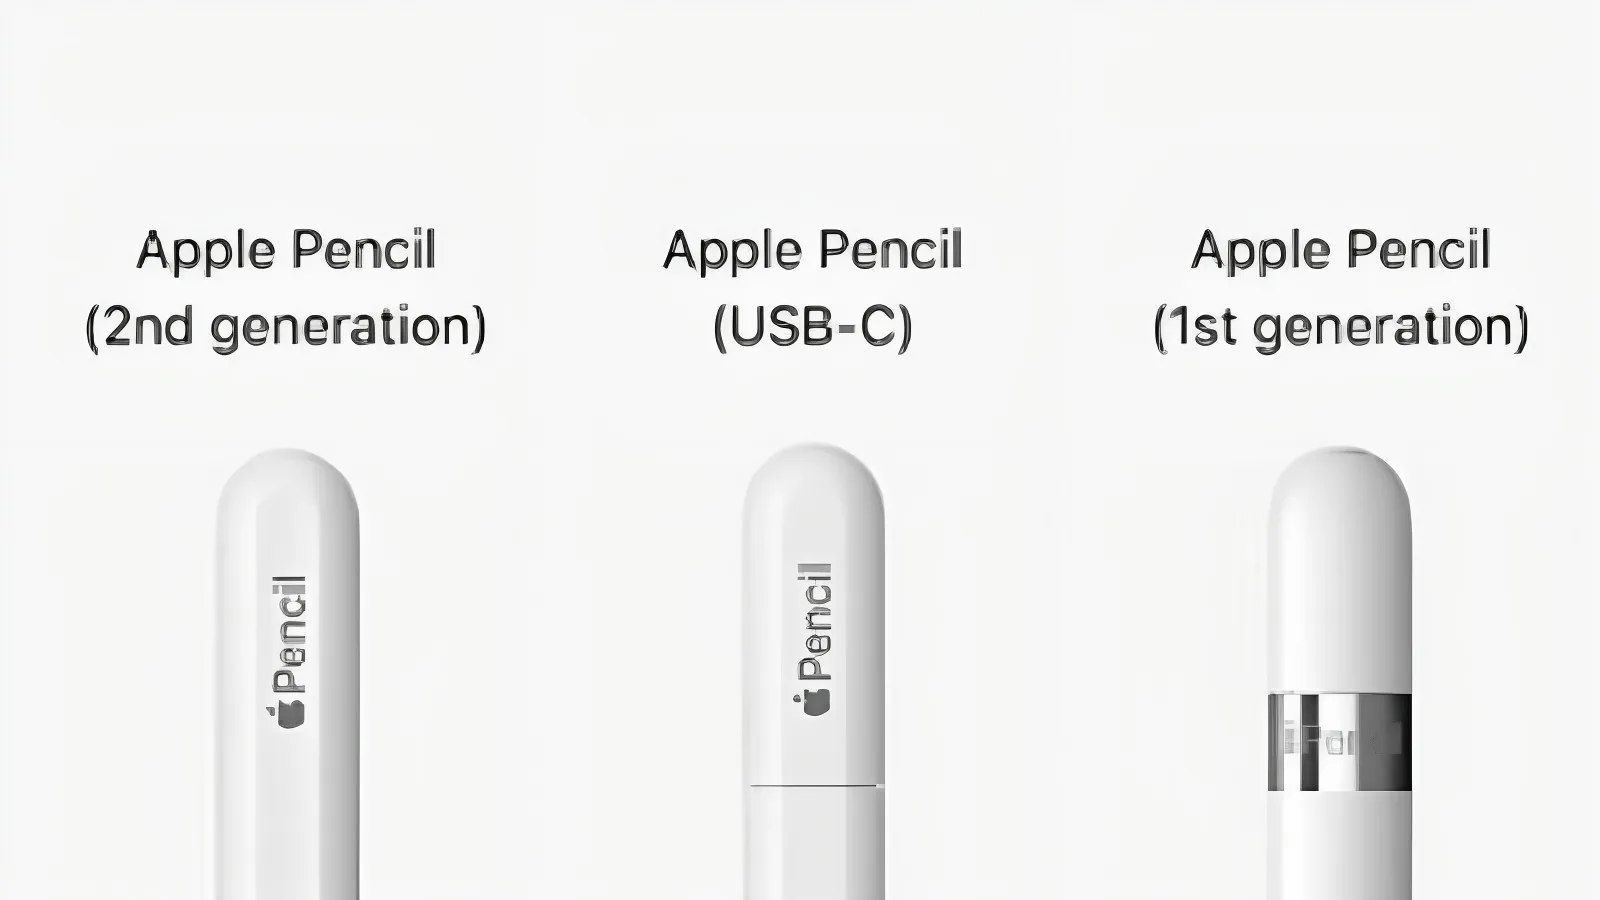 How to choose the right Apple Pencil for your iPad: A comparison